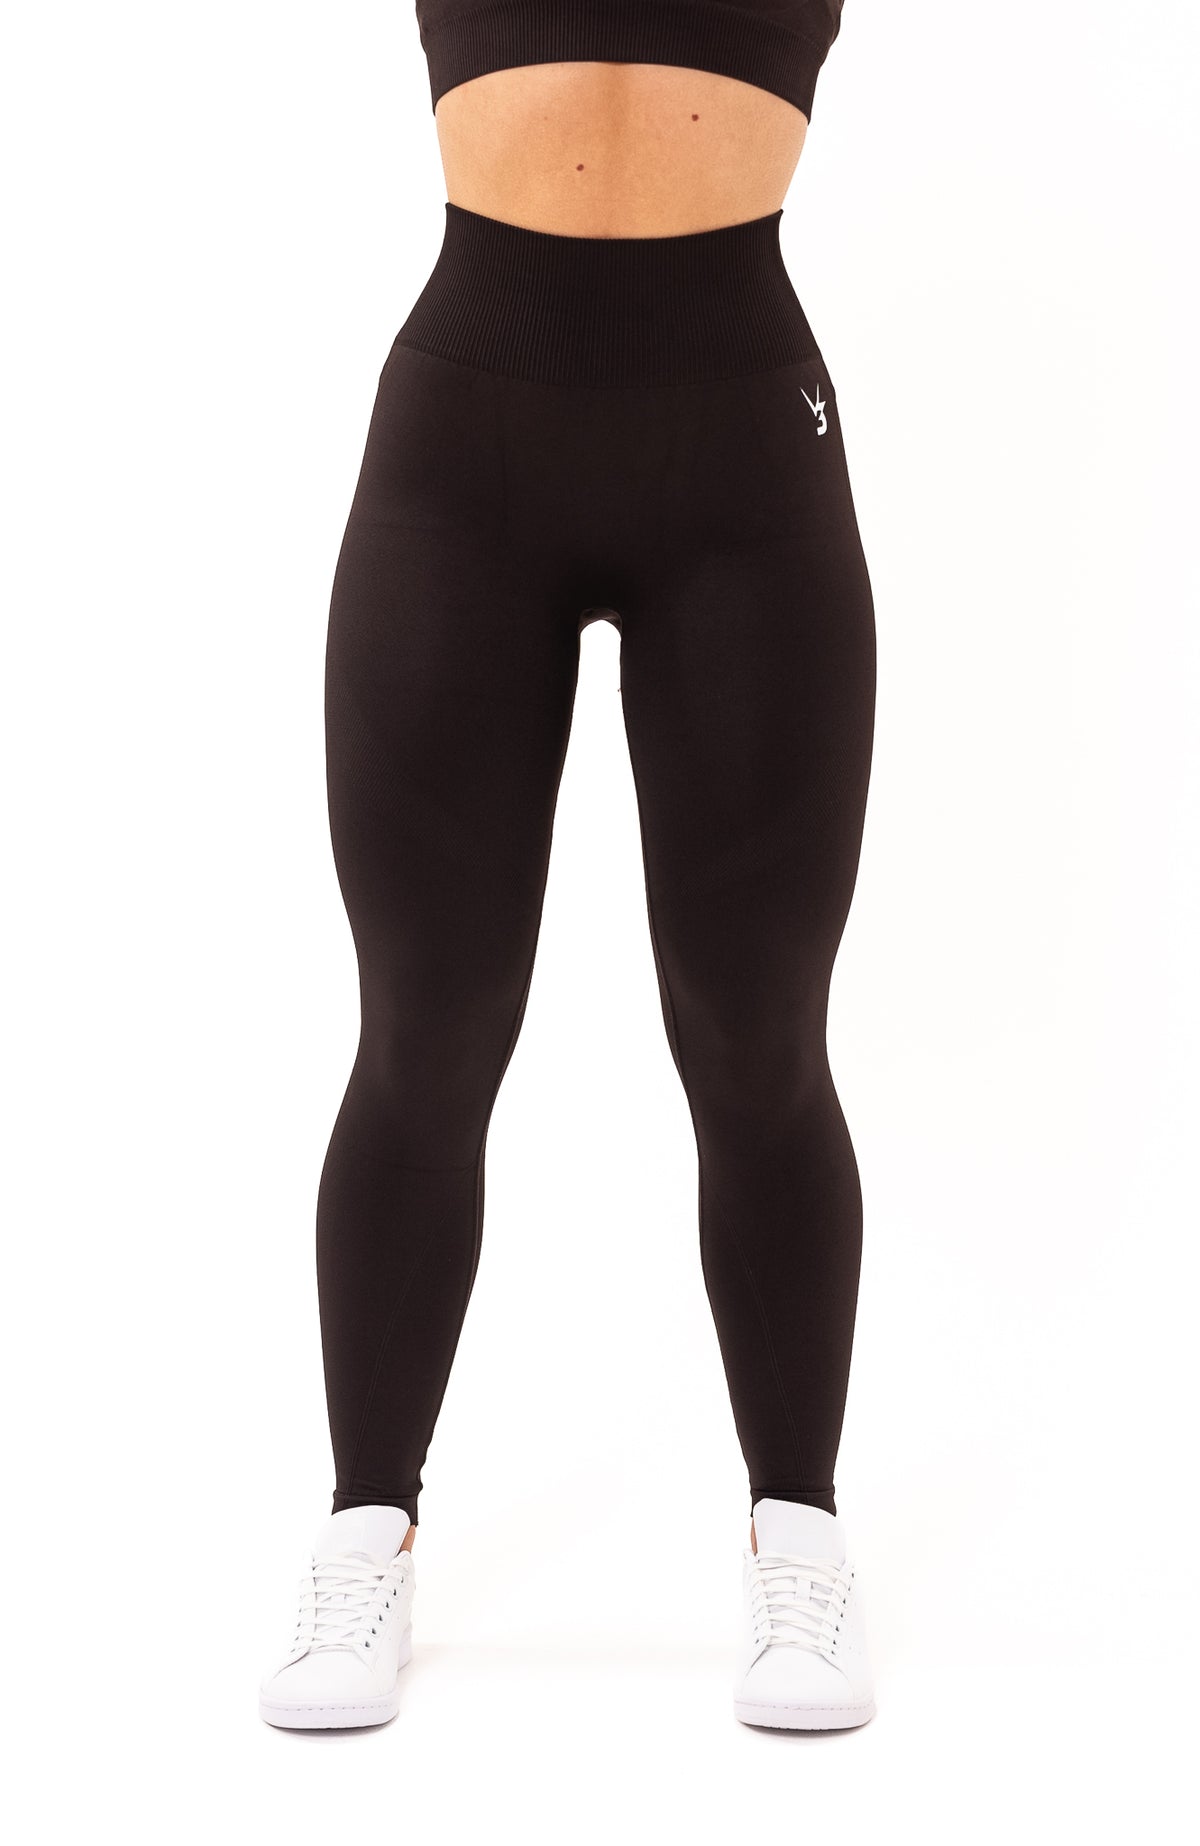 Shop for Limitless Seamless Leggings - Walnut Brown V3 Apparel at